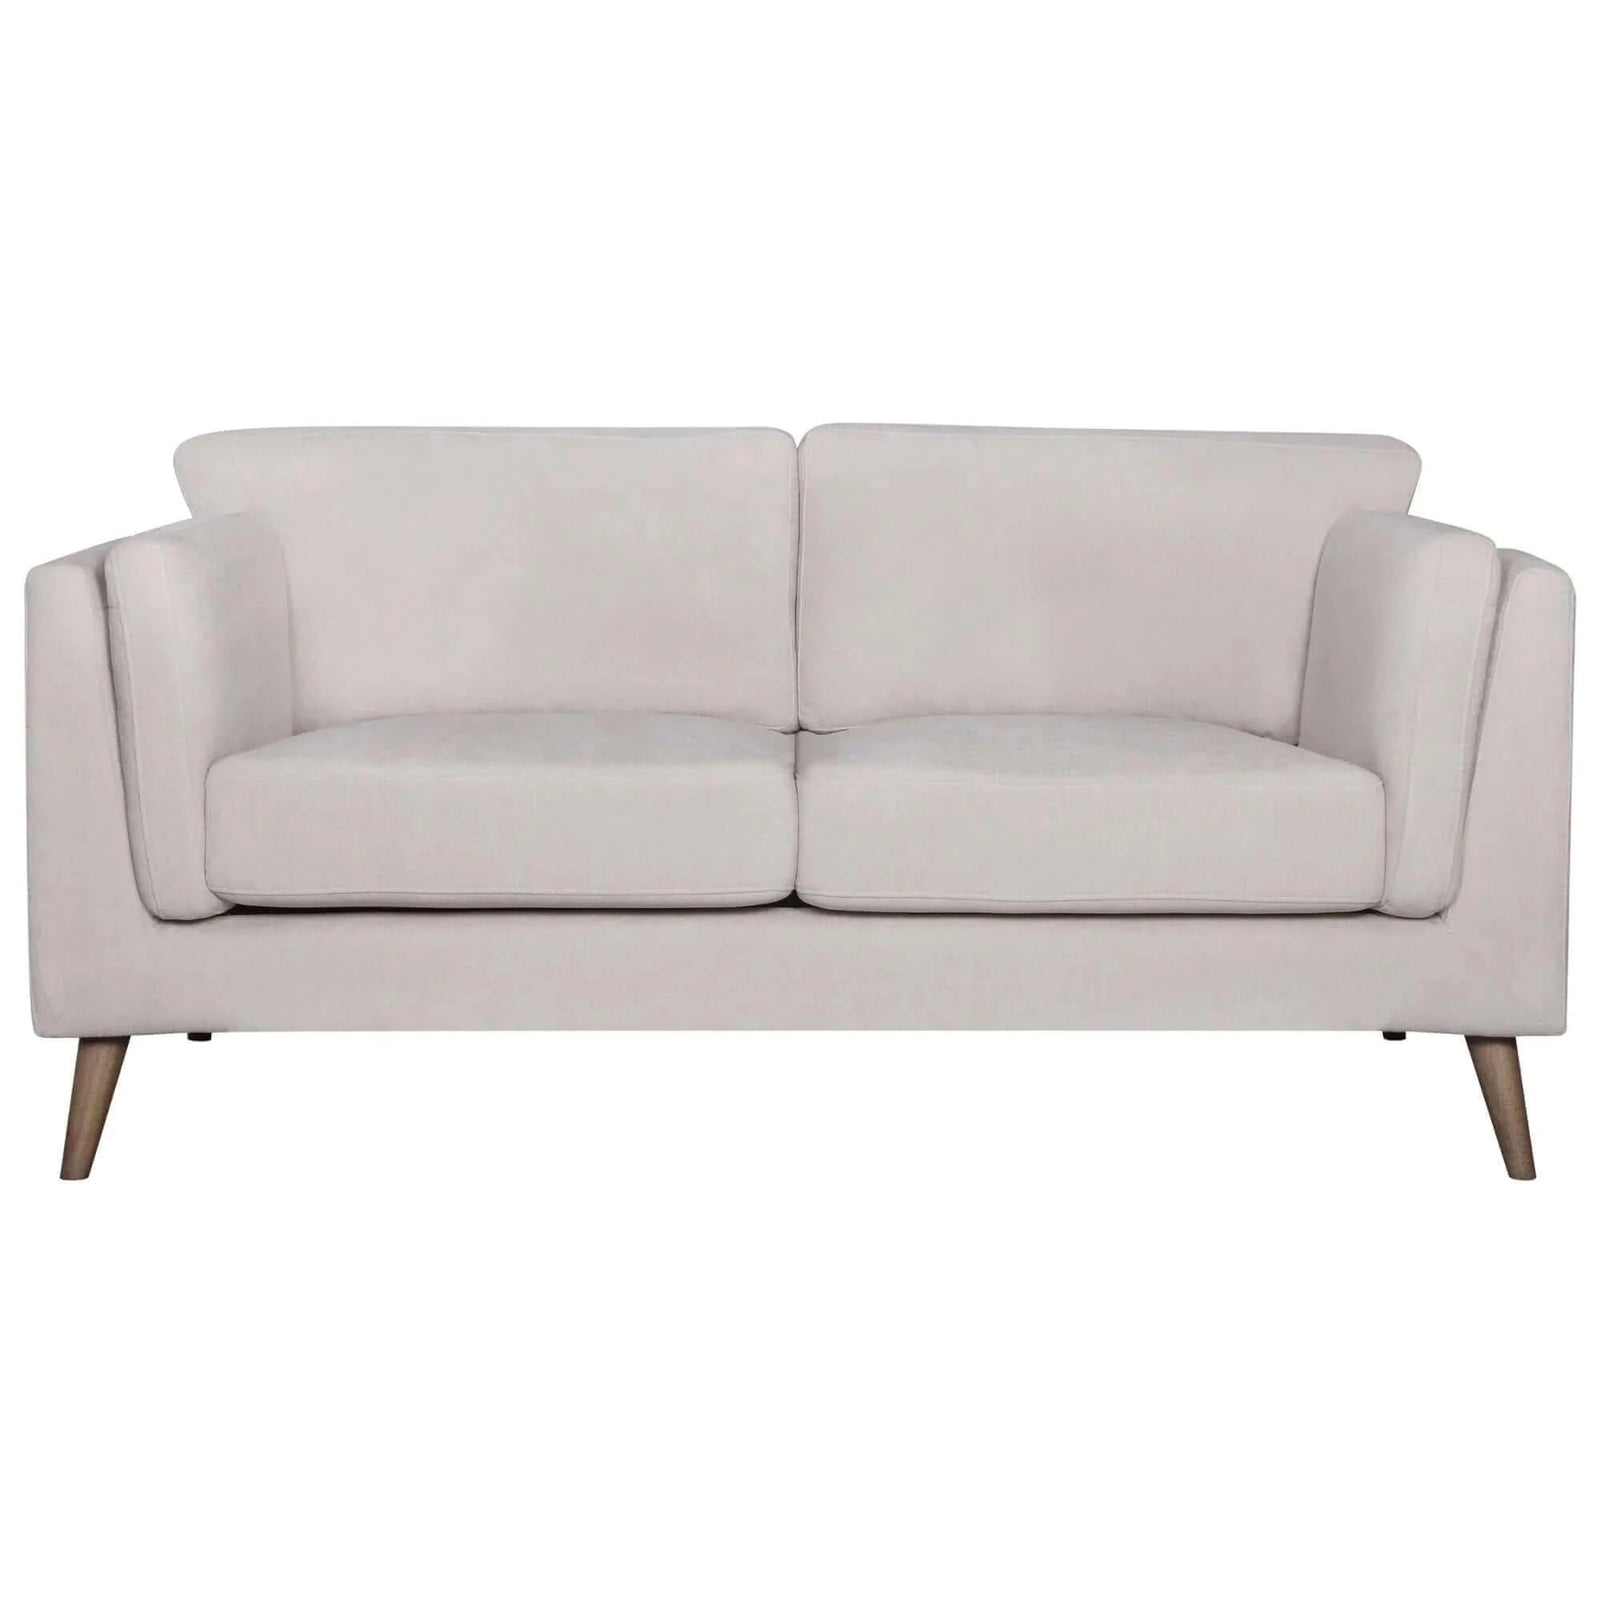 Buy Nooa 2 Seater Sofa Fabric Uplholstered Lounge Couch – Upinteriors-Upinteriors